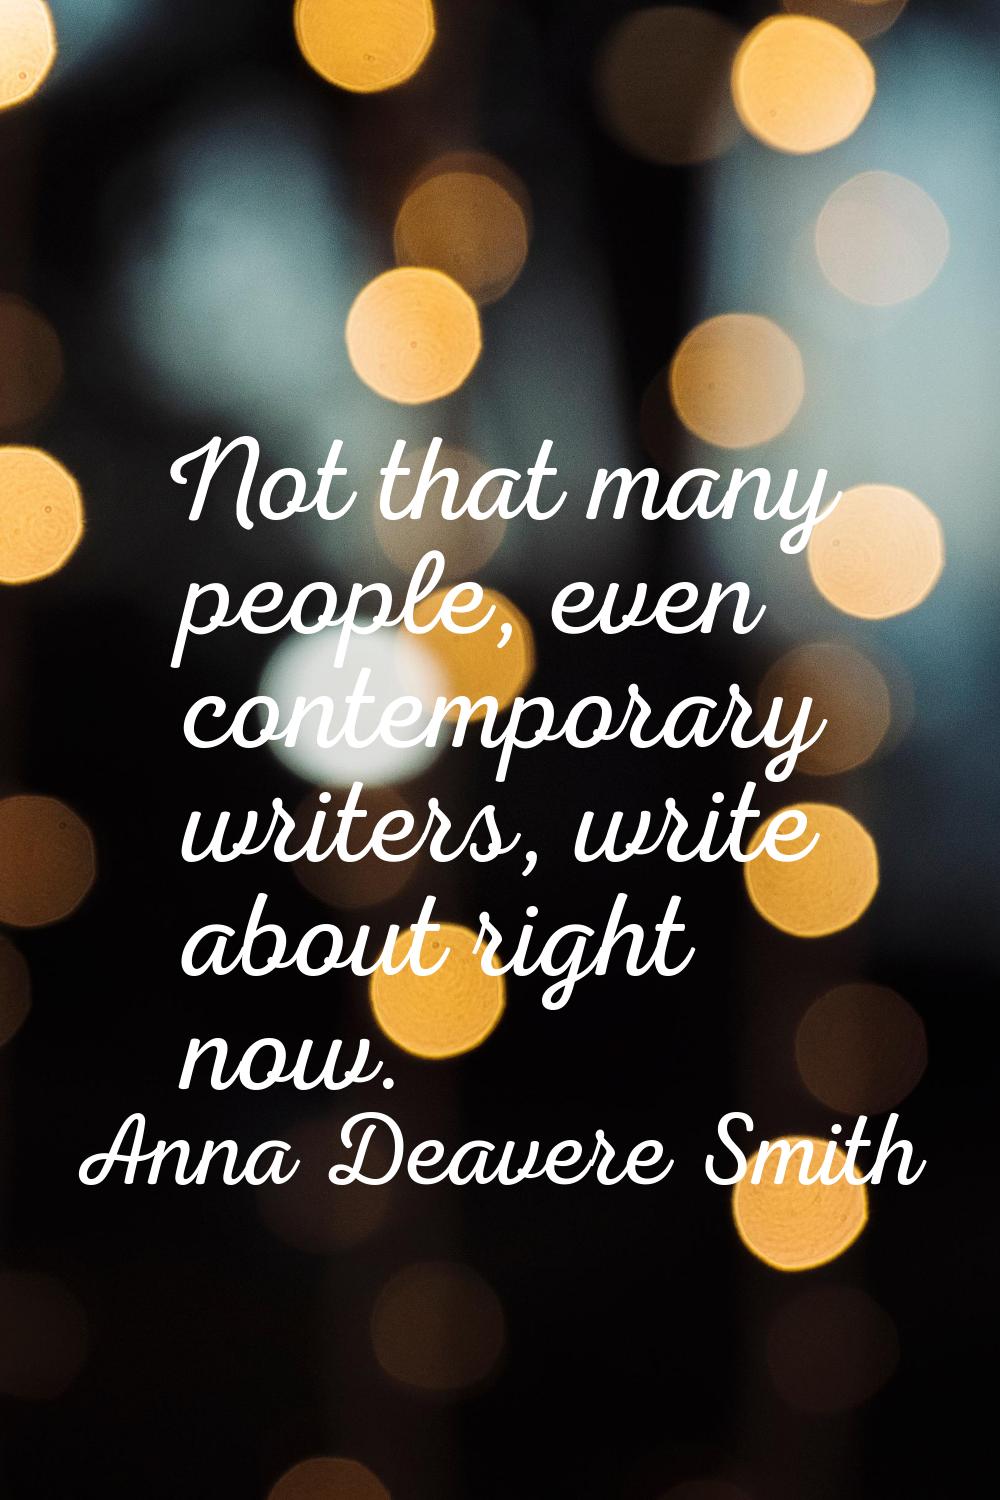 Not that many people, even contemporary writers, write about right now.